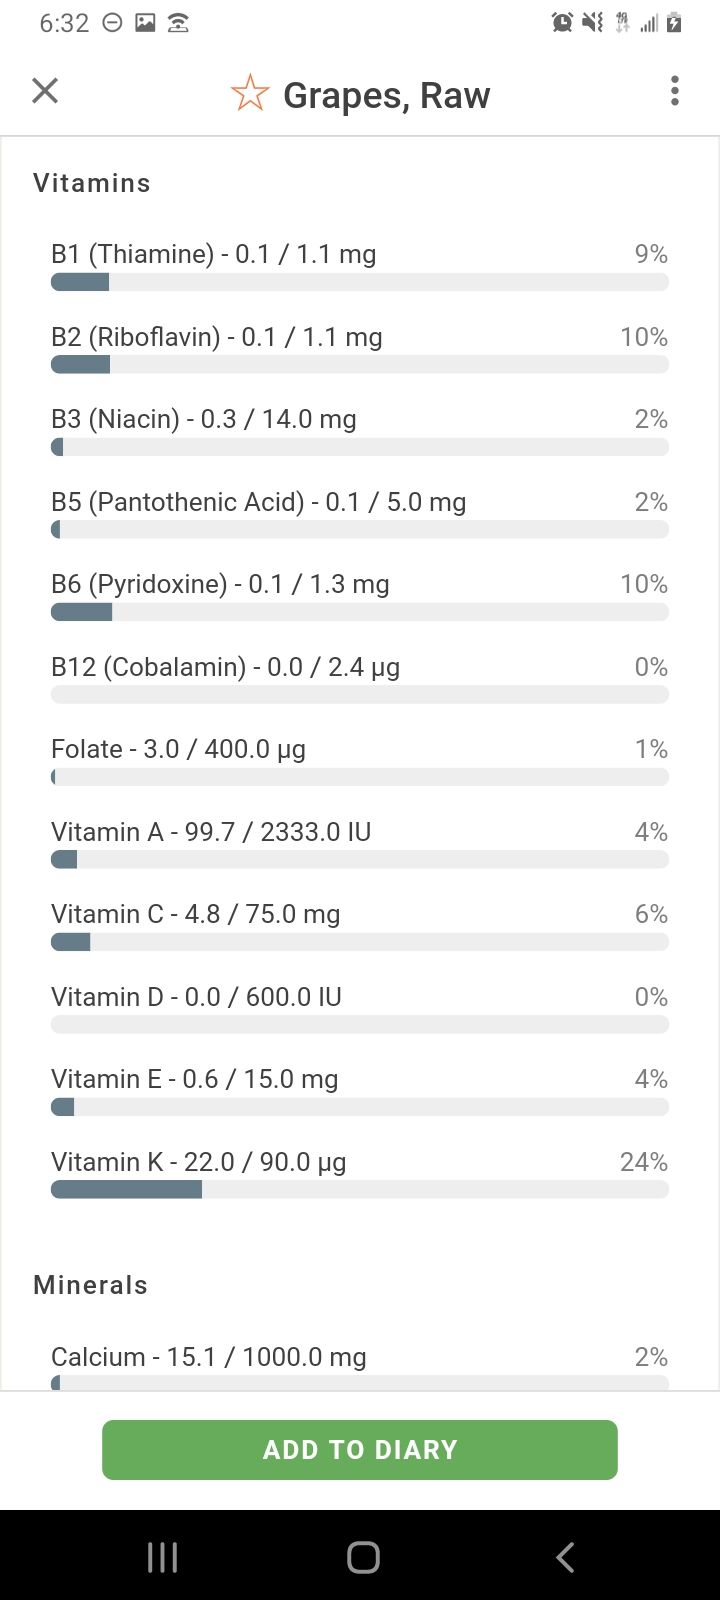 A breakdown of vitamins and minerals in Chronometer